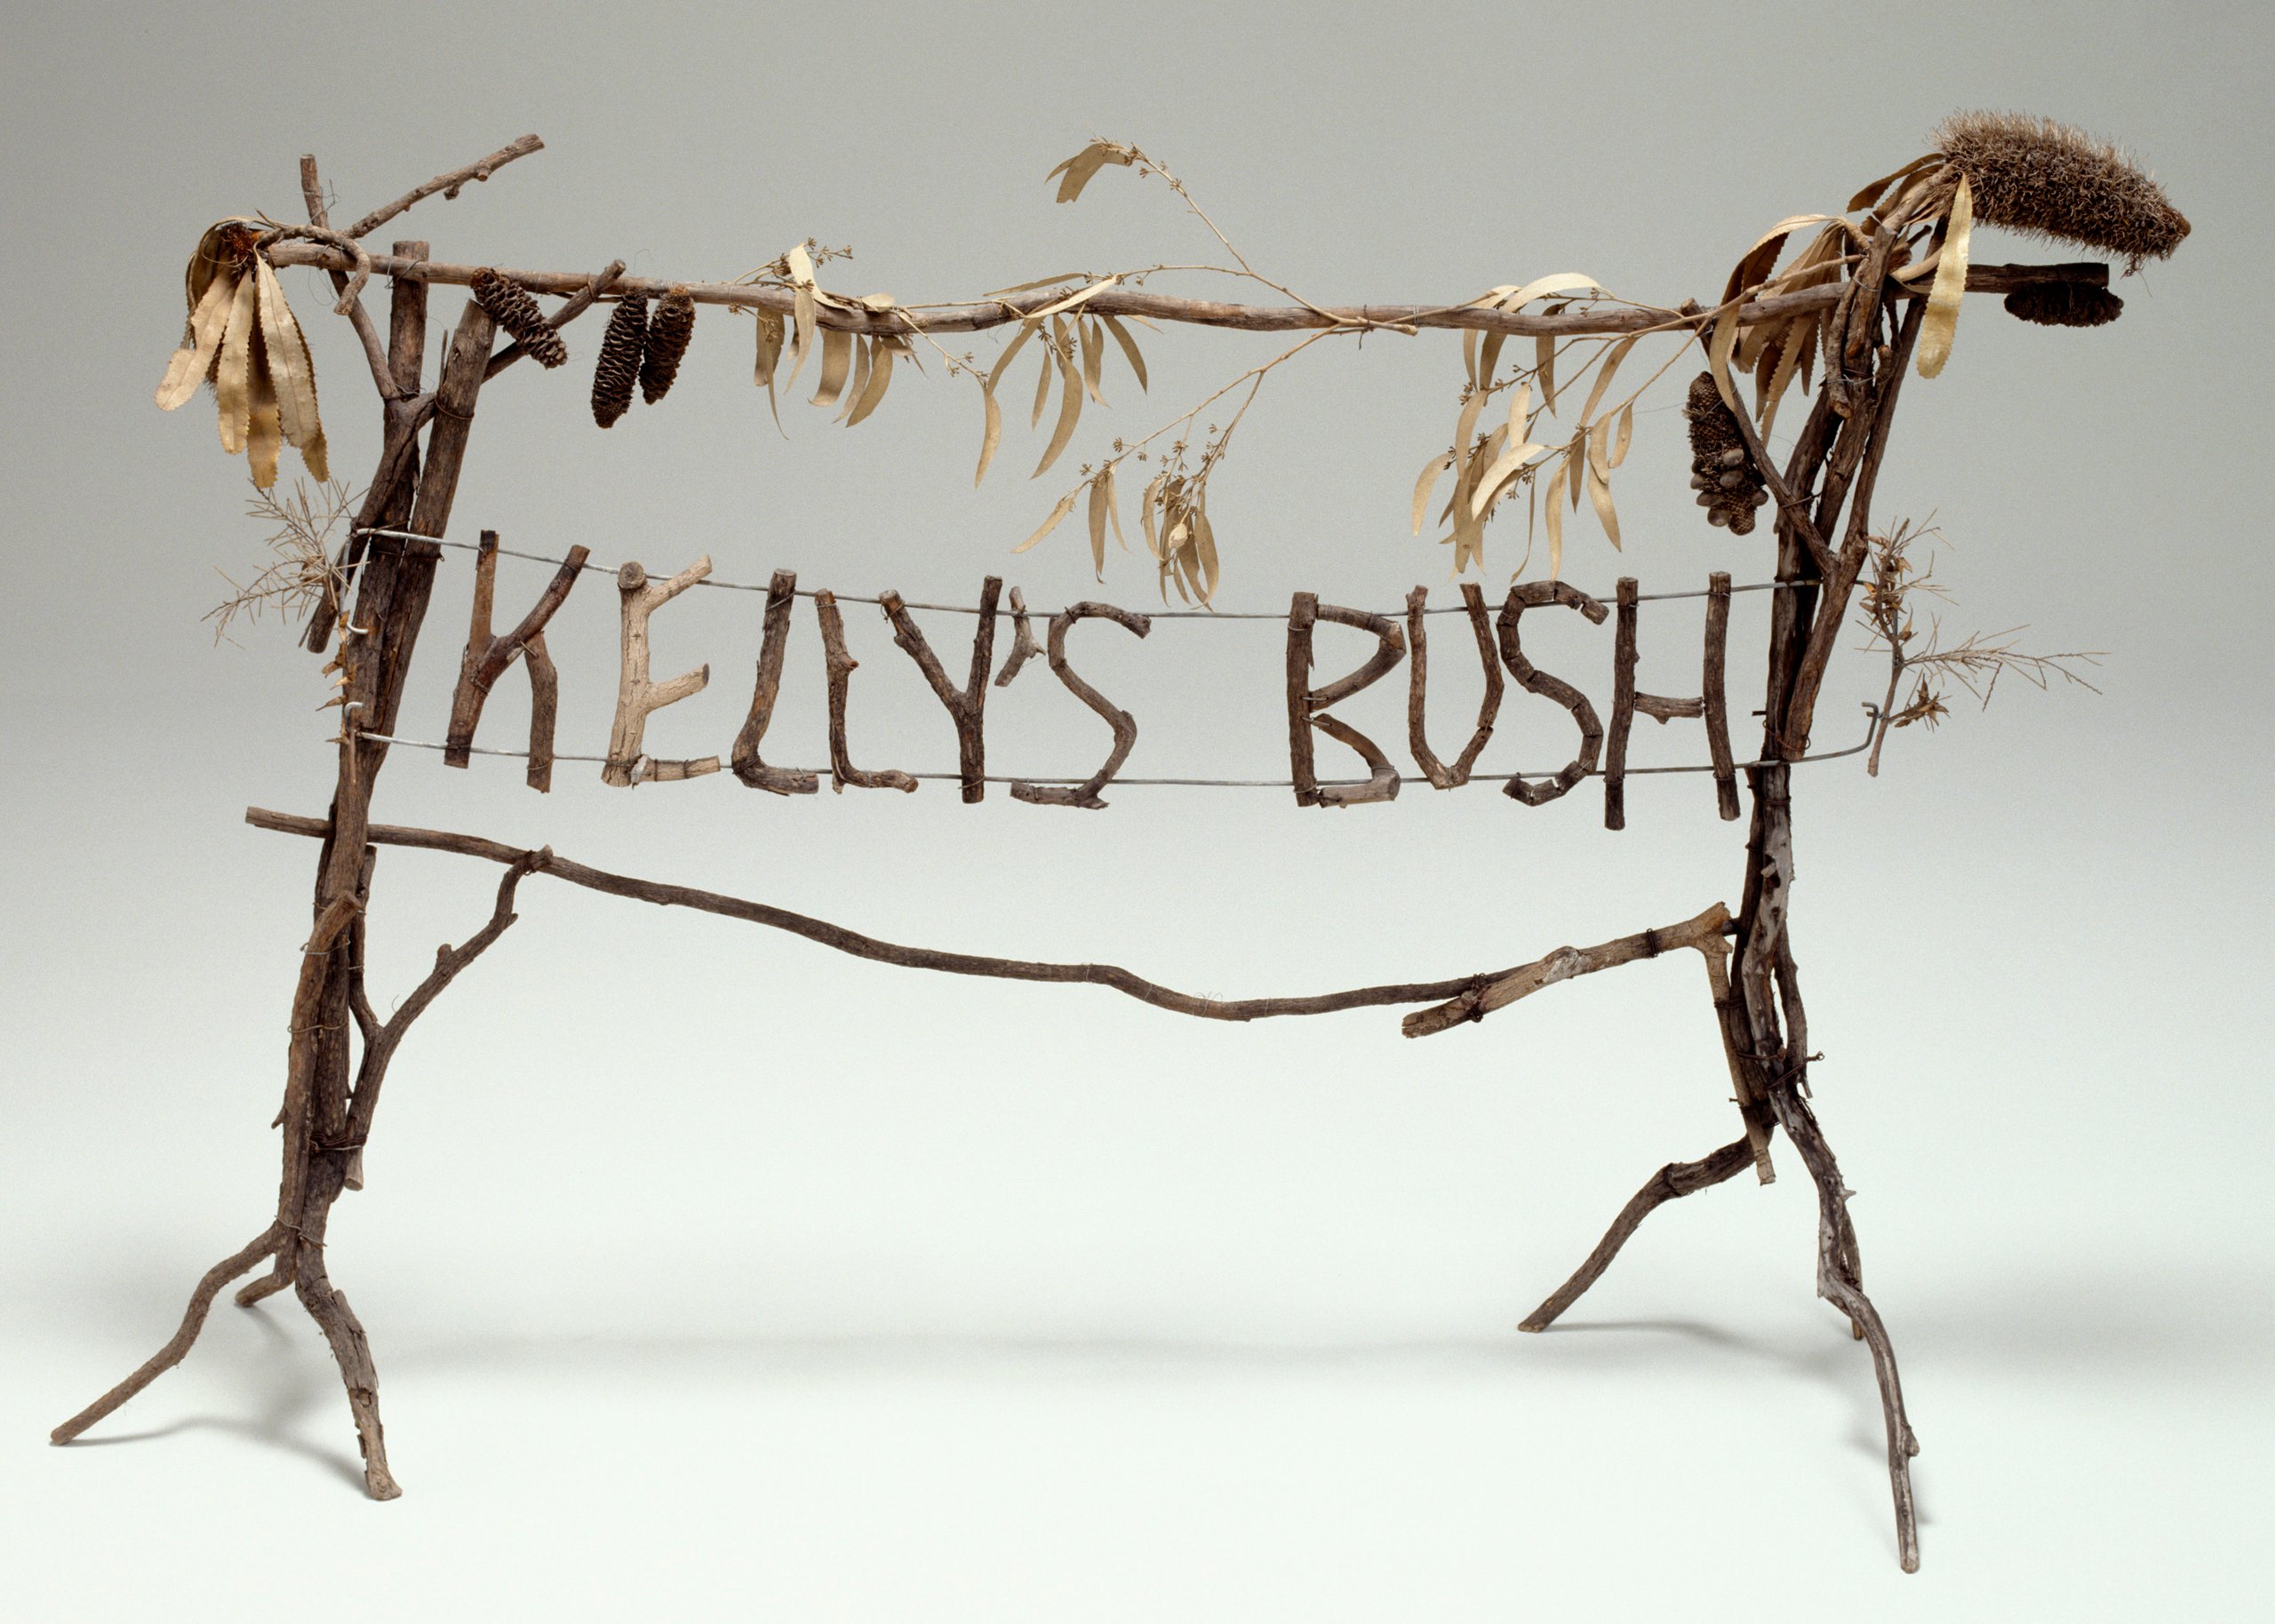 'Kelly's Bush' protest stand